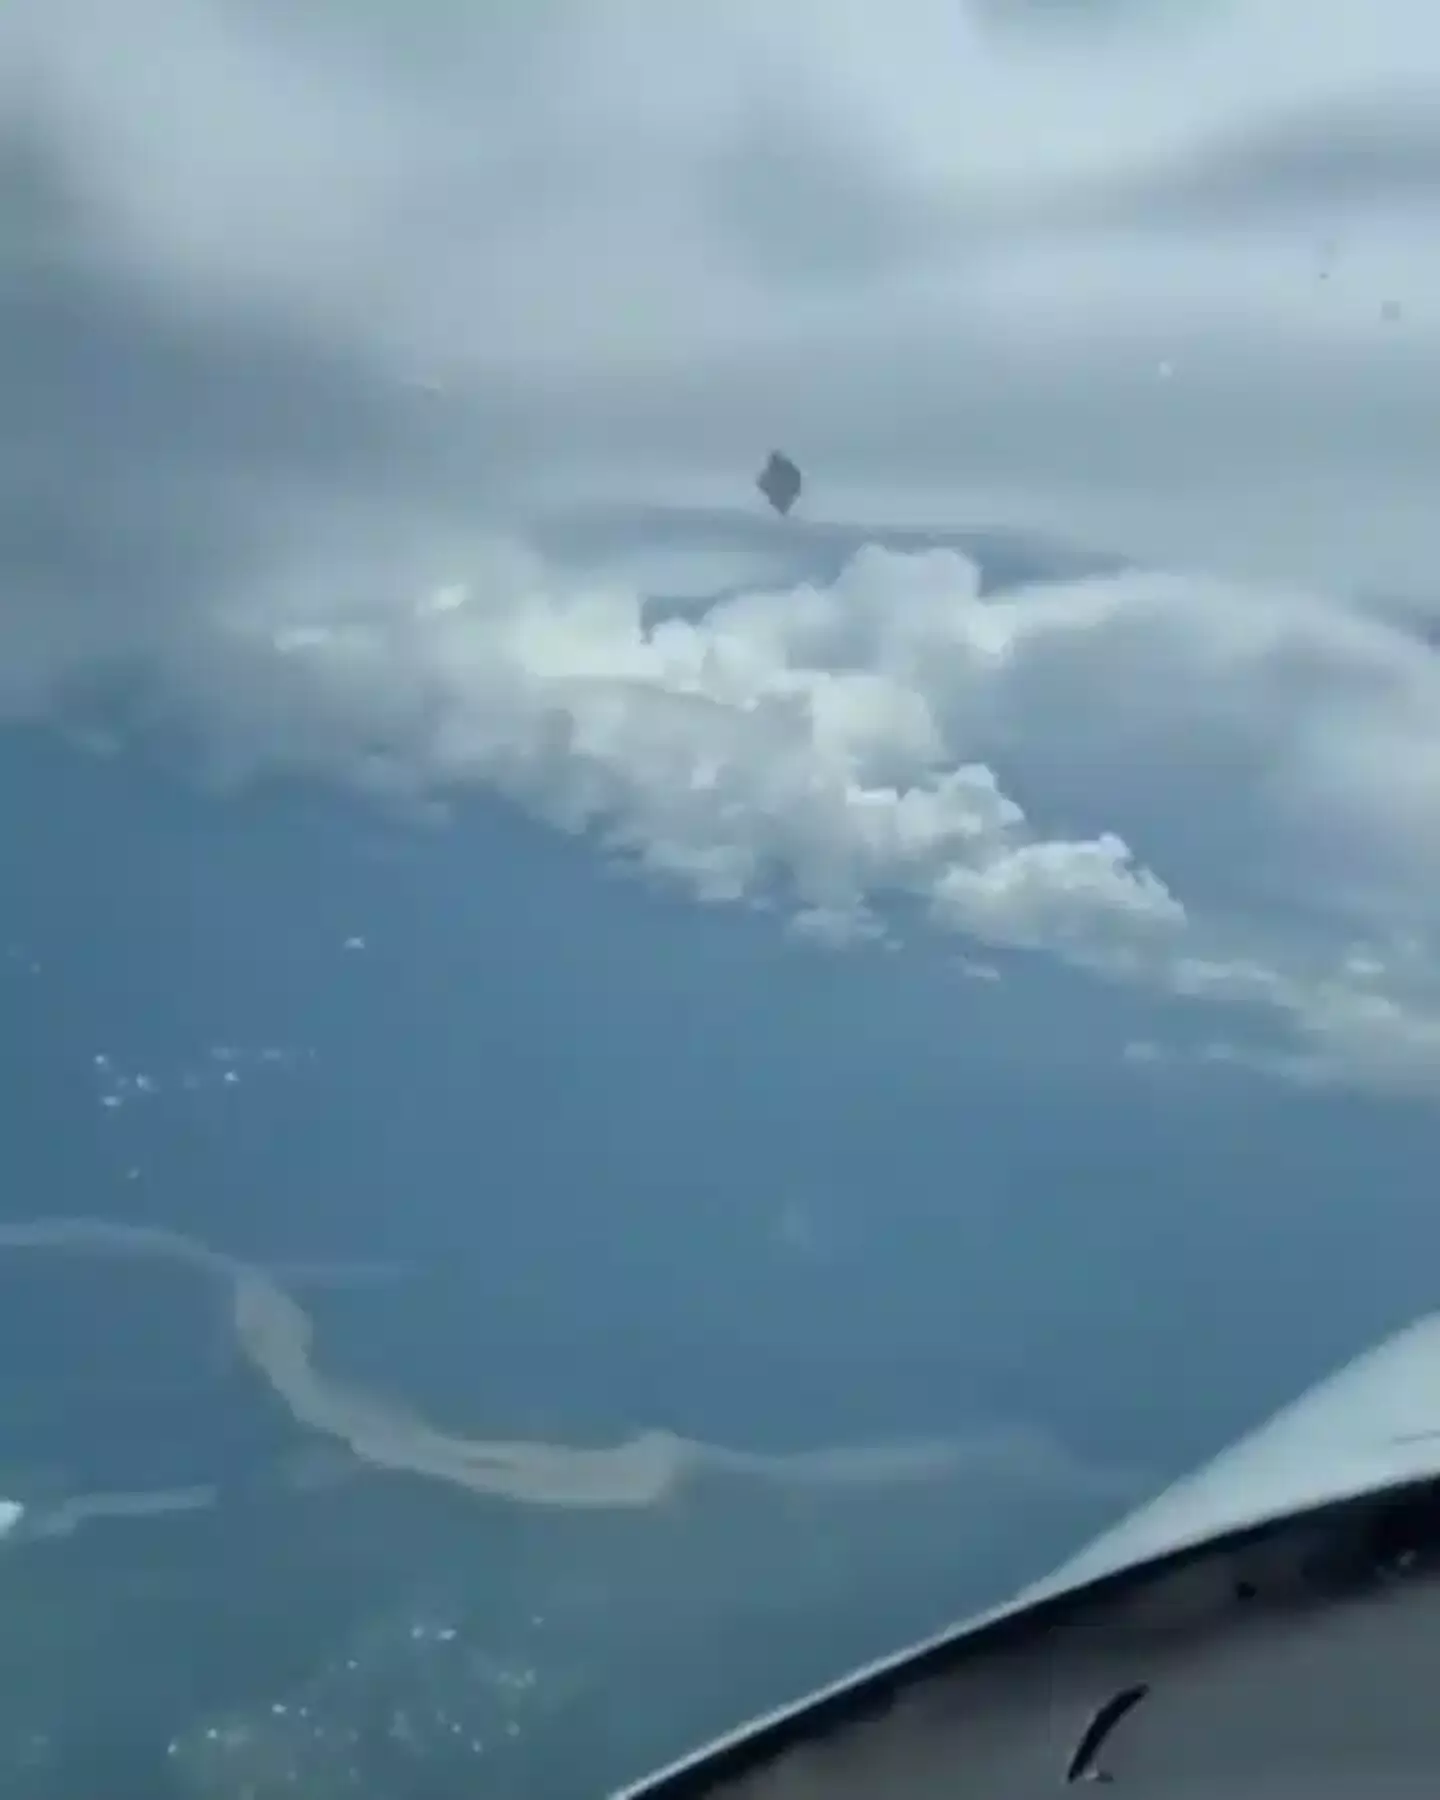 Pilot Jorge A. Arteaga spotted the bizarre object hurtling over Colombia.